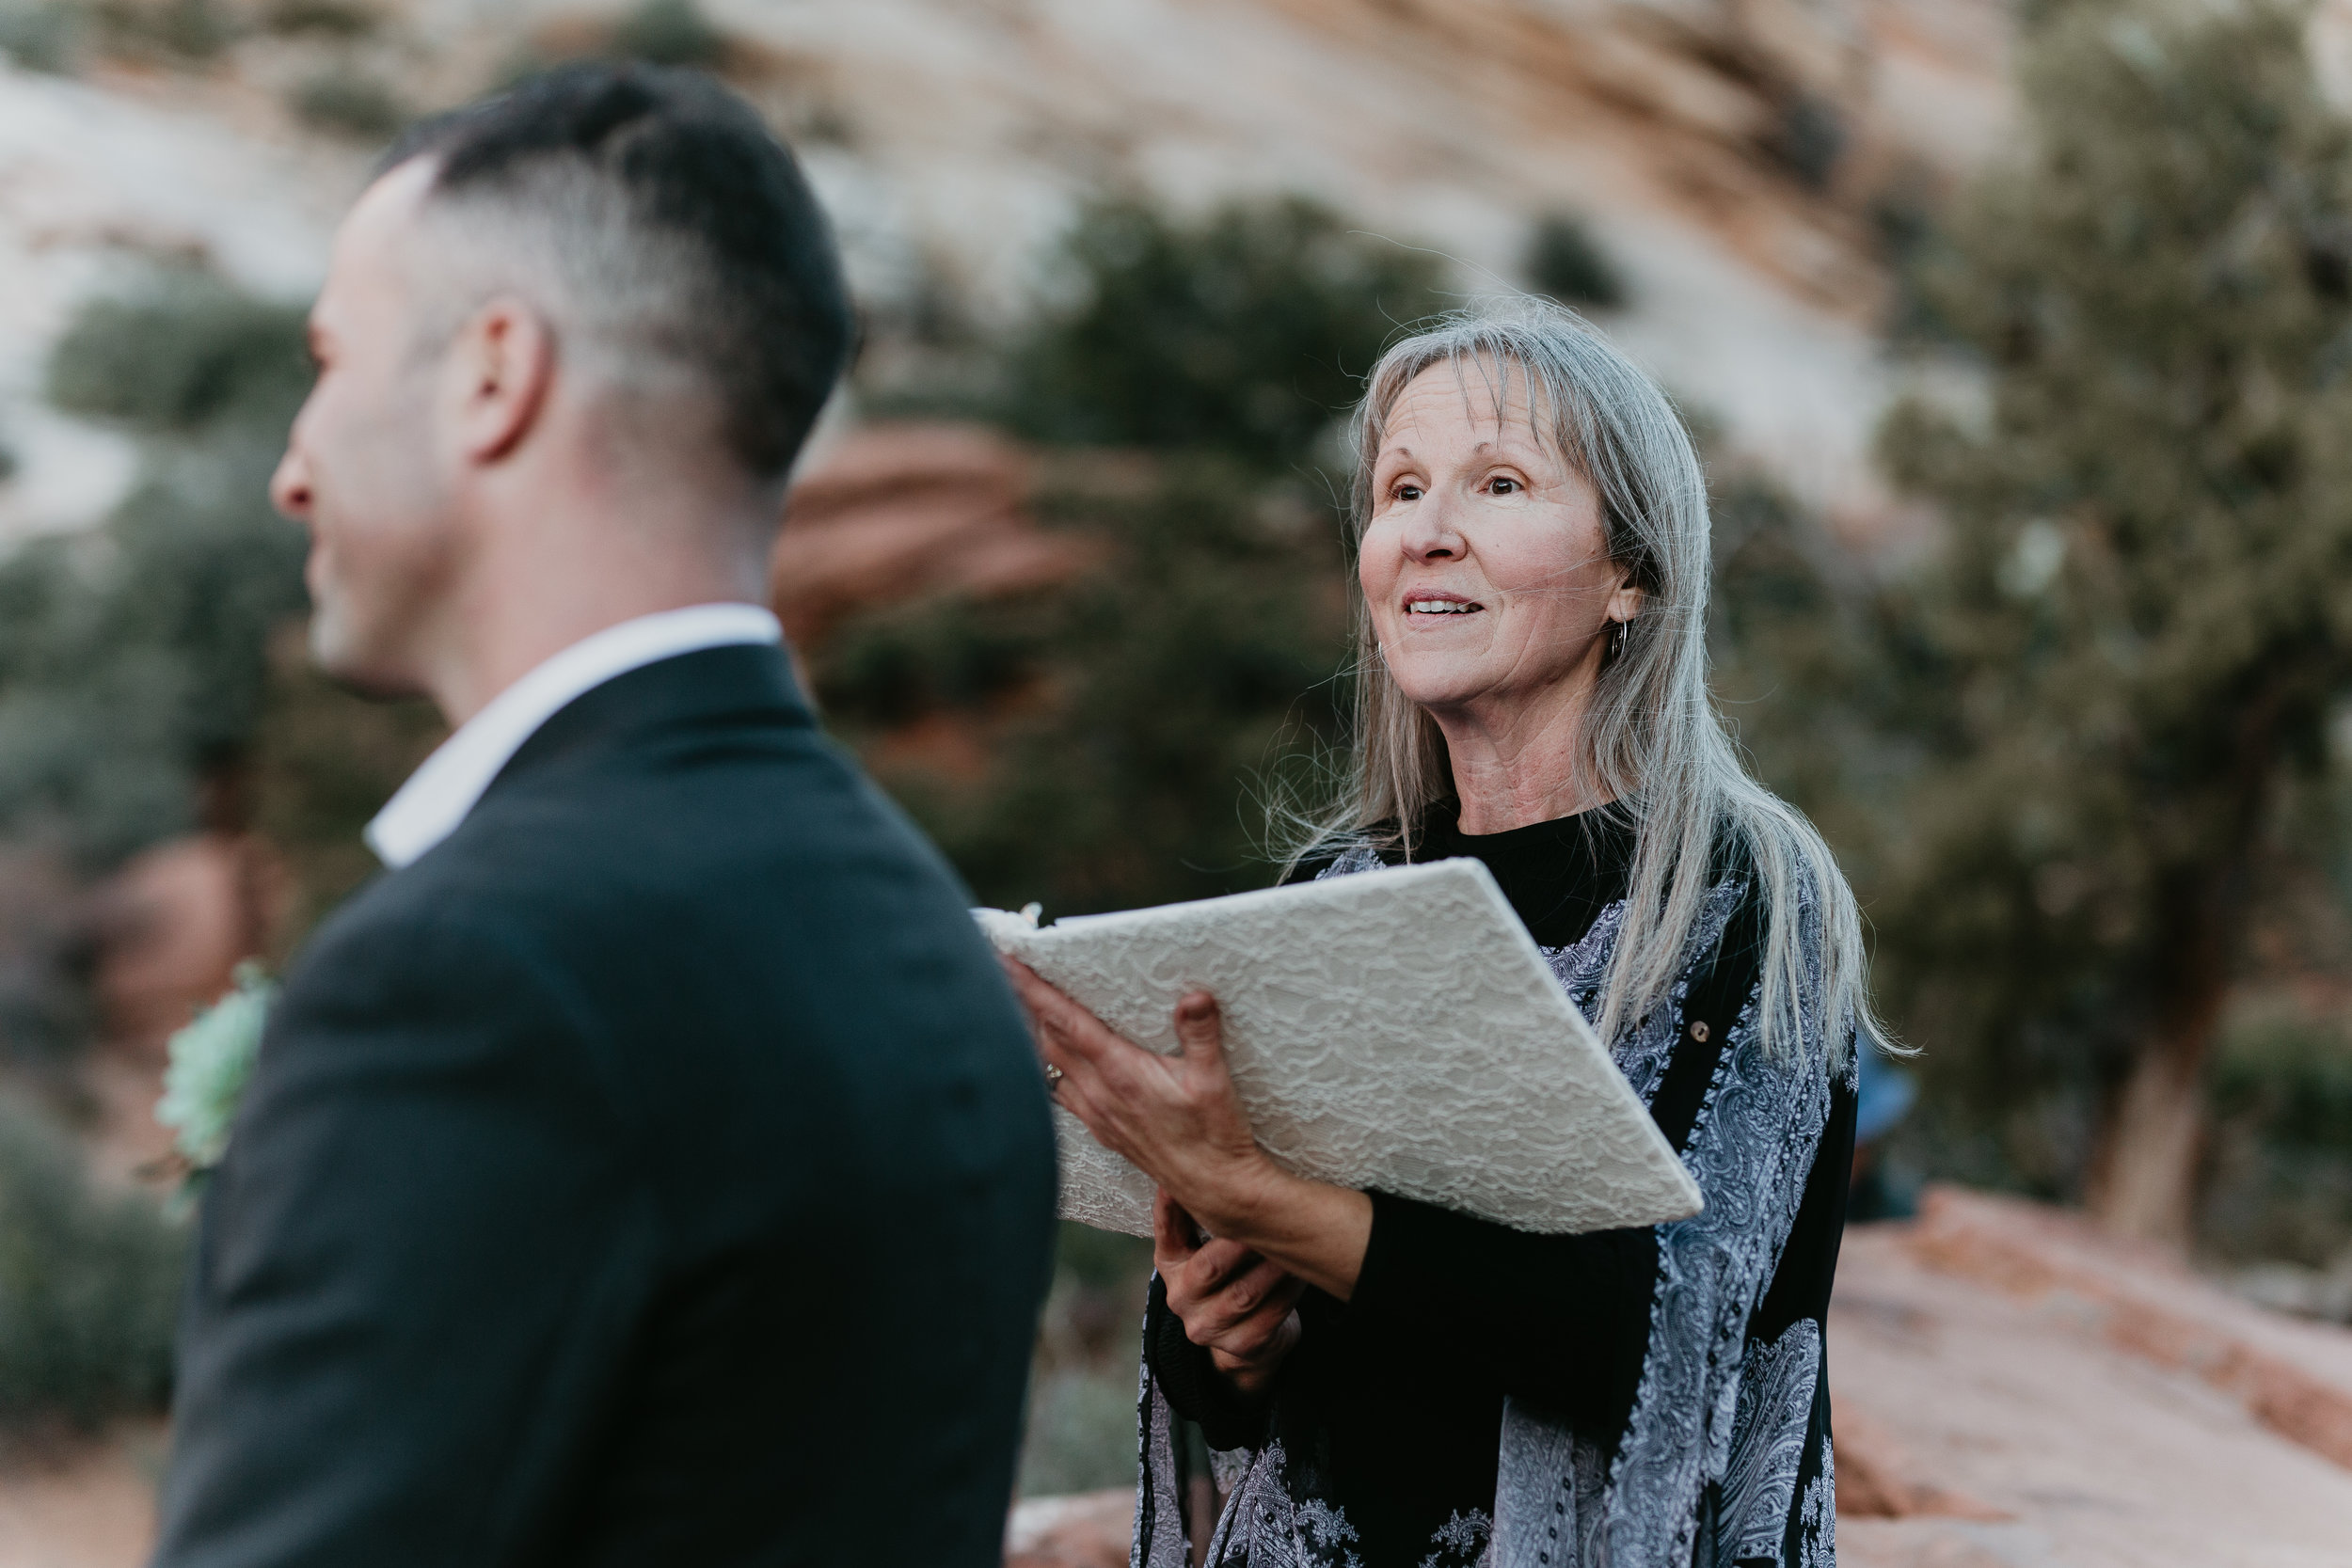 nicole-daacke-photography-zion-national-park-elopement-photographer-canyon-overlook-trail-elope-hiking-adventure-wedding-photos-fall-utah-red-rock-canyon-stgeorge-eloping-photographer-52.jpg